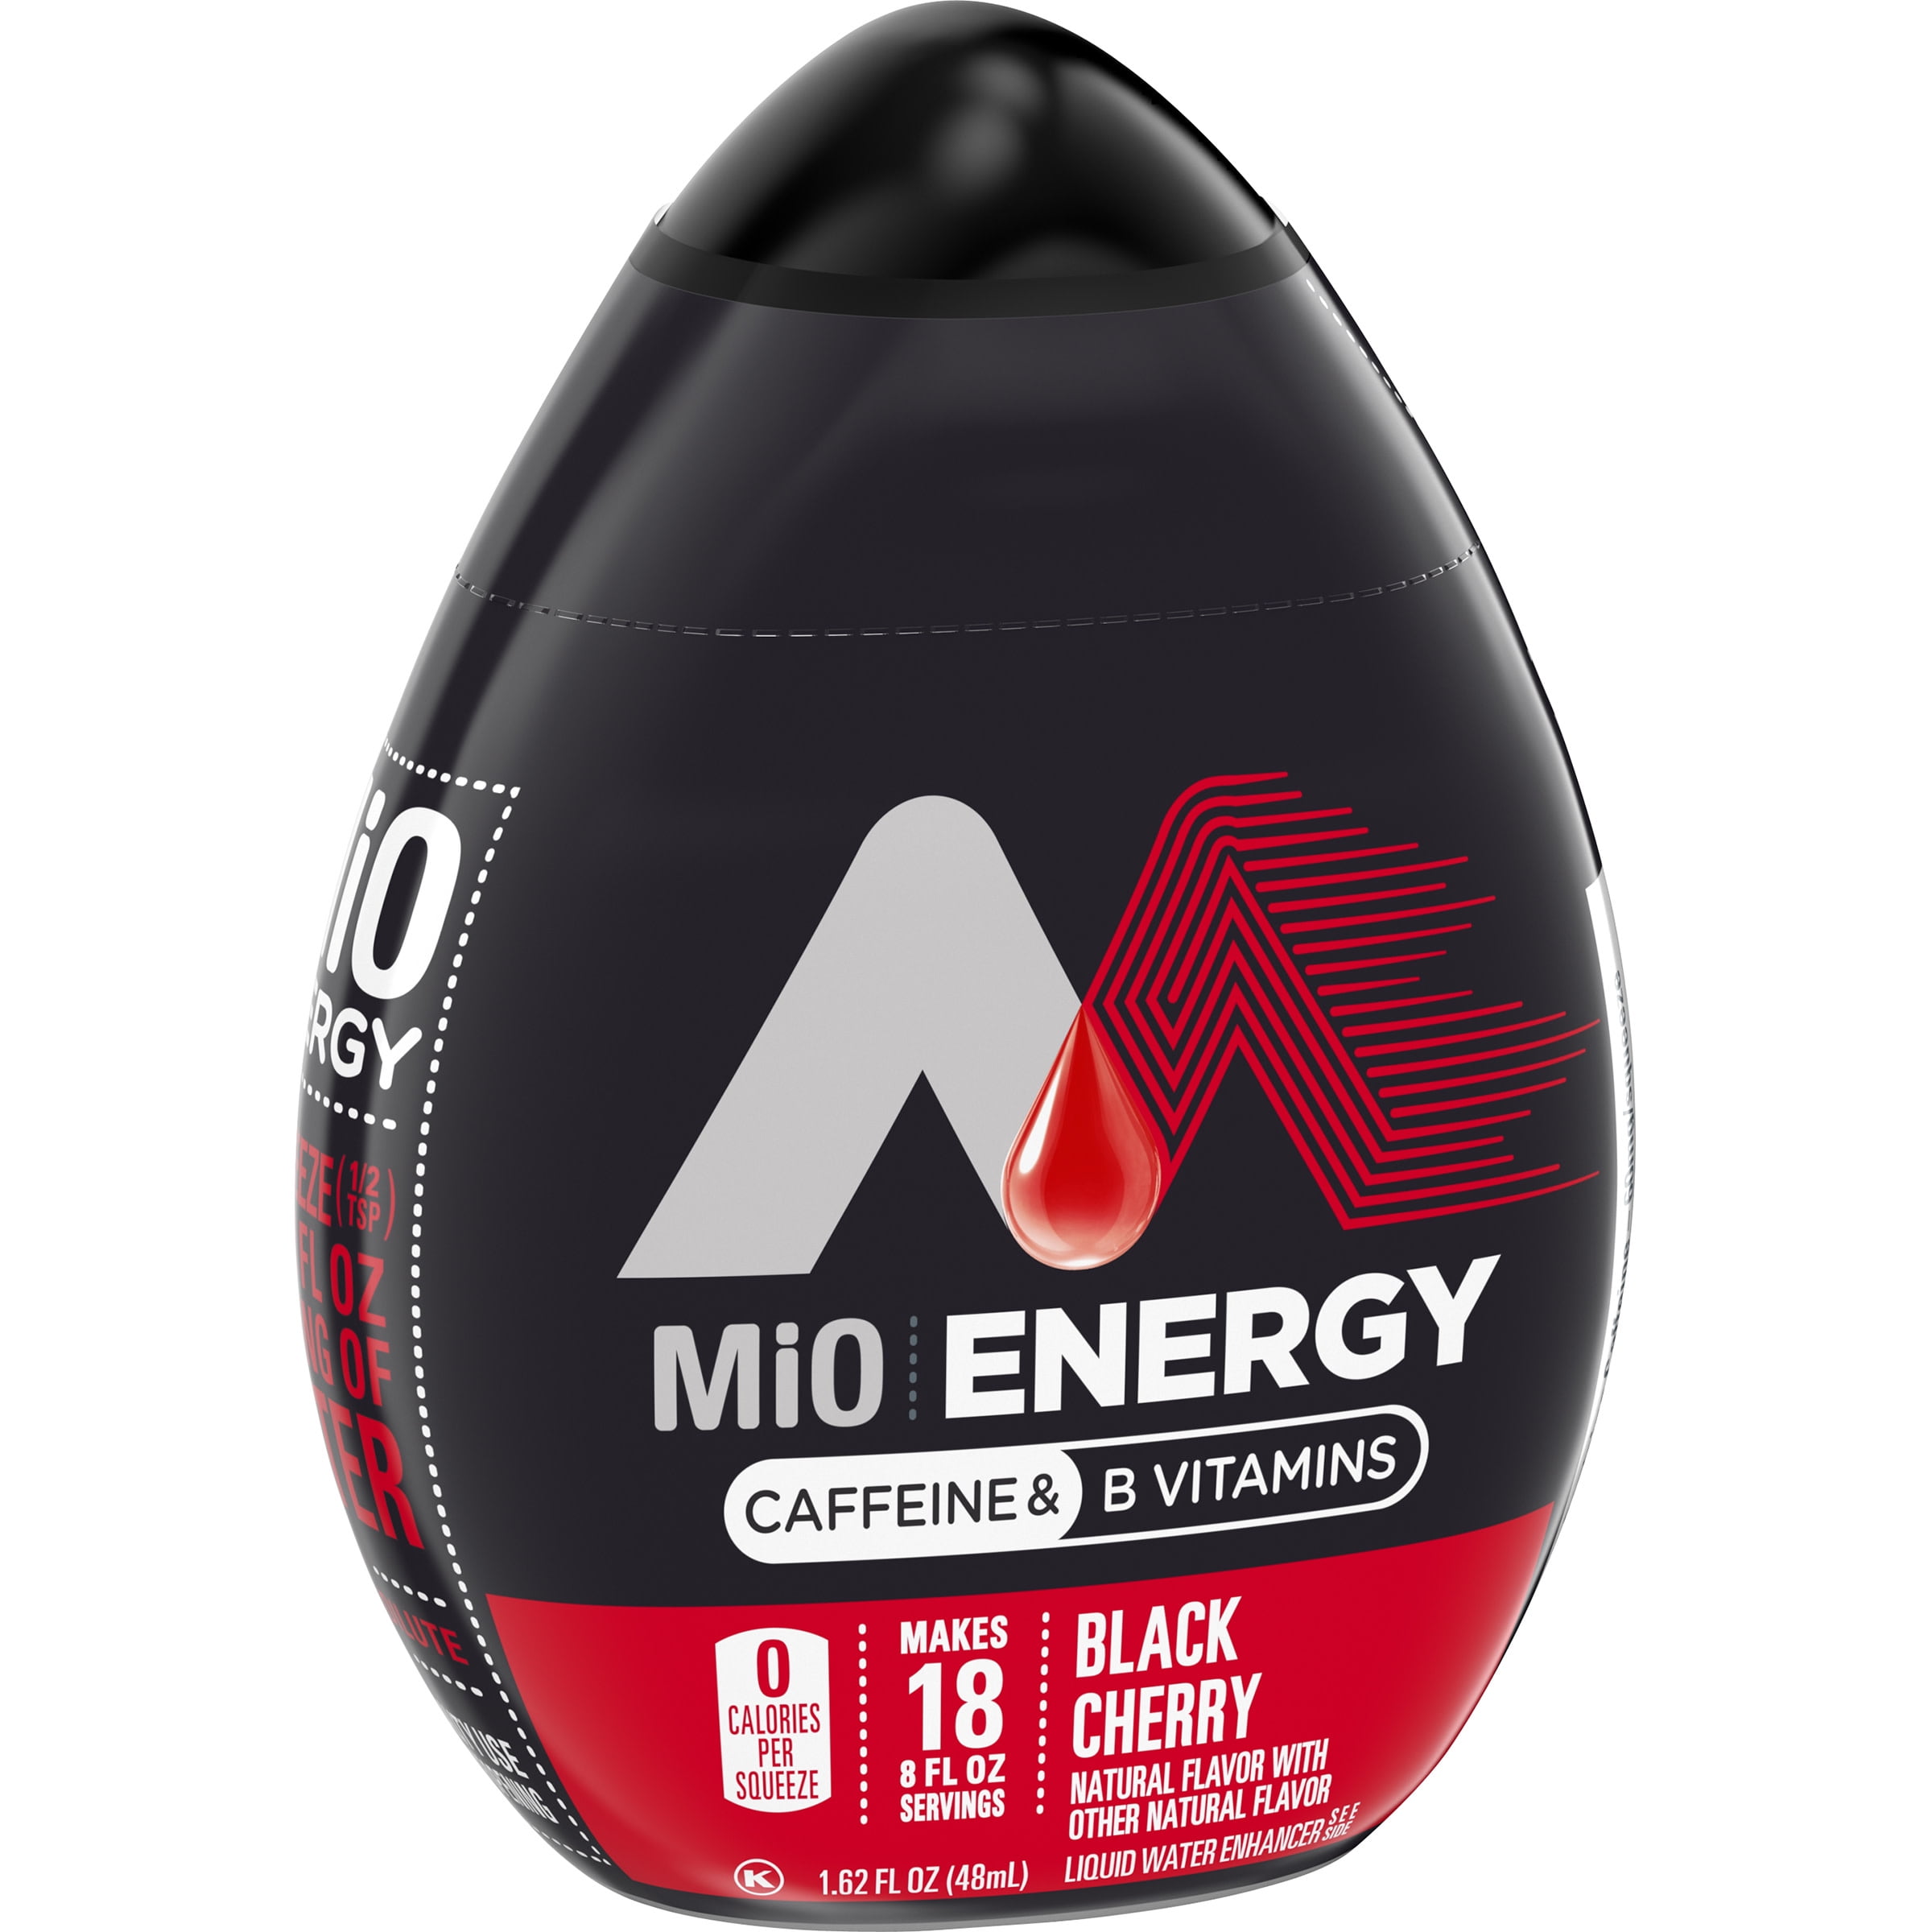 Mio Energy Black Cherry Naturally Flavored Liquid Water Enhancer With Caffe...